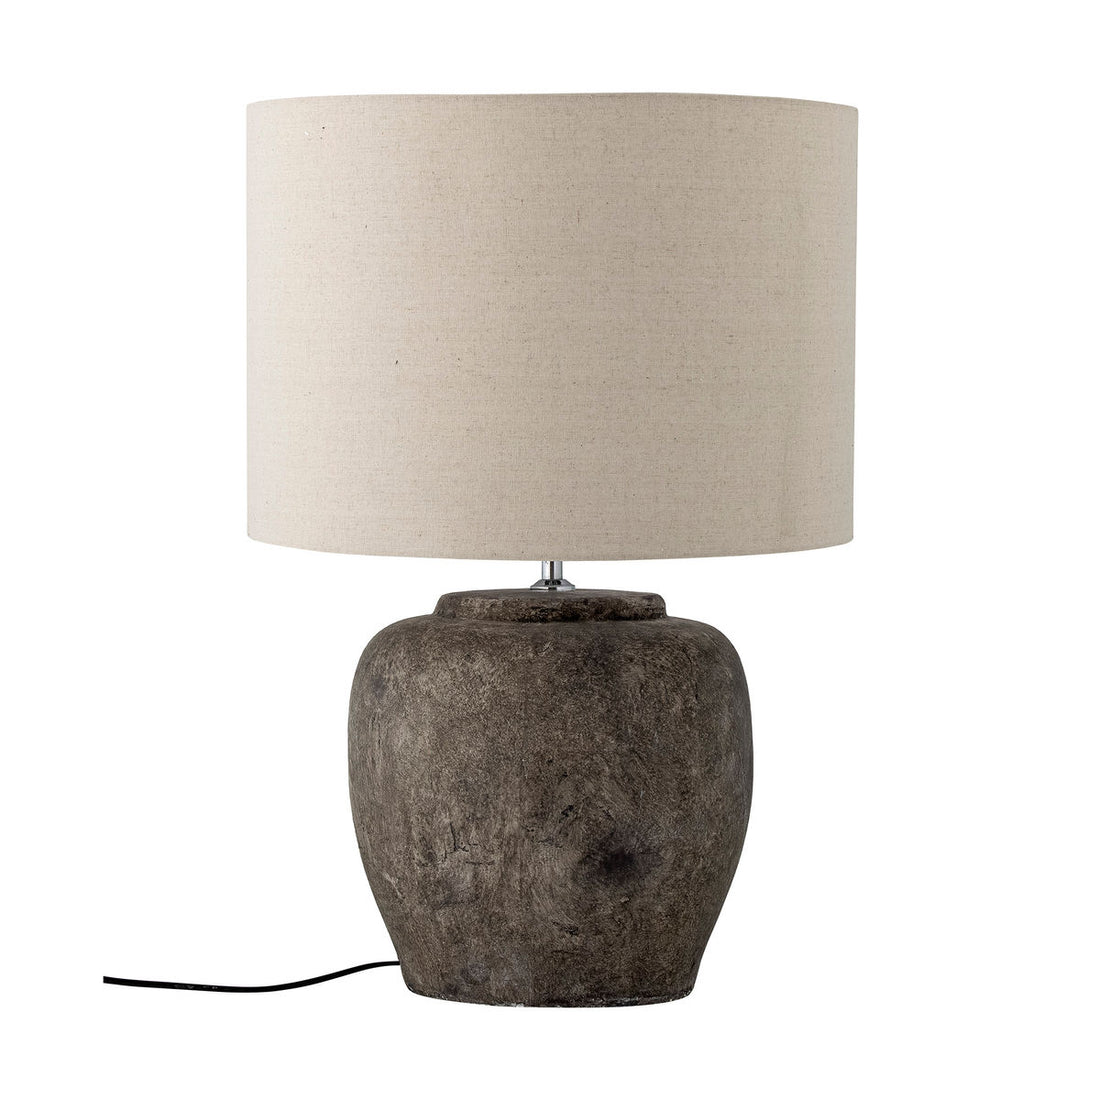 Bloomingville Isabelle table lamp, nature, stoneware